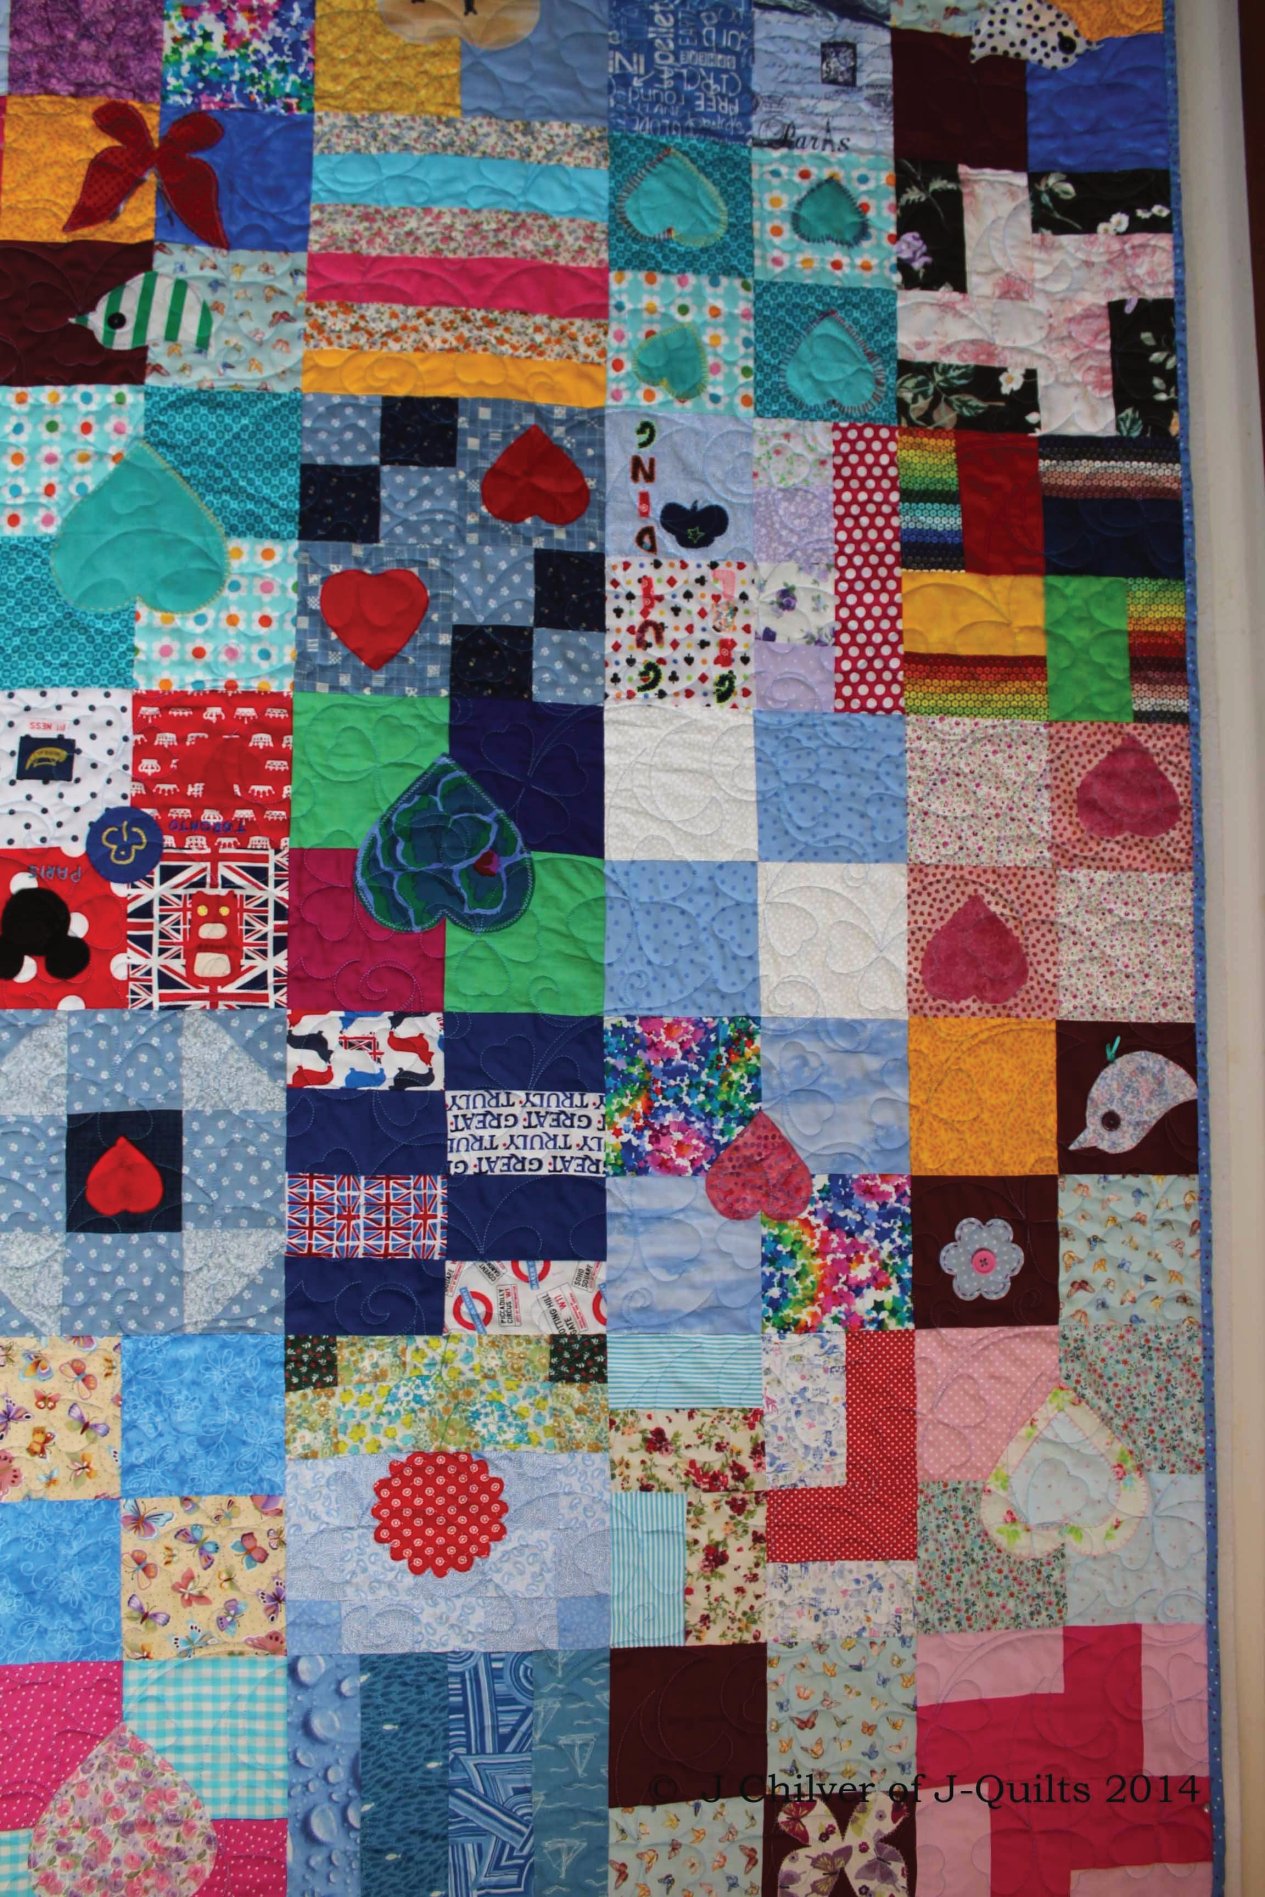 Lovely scrappy nature of the quilt